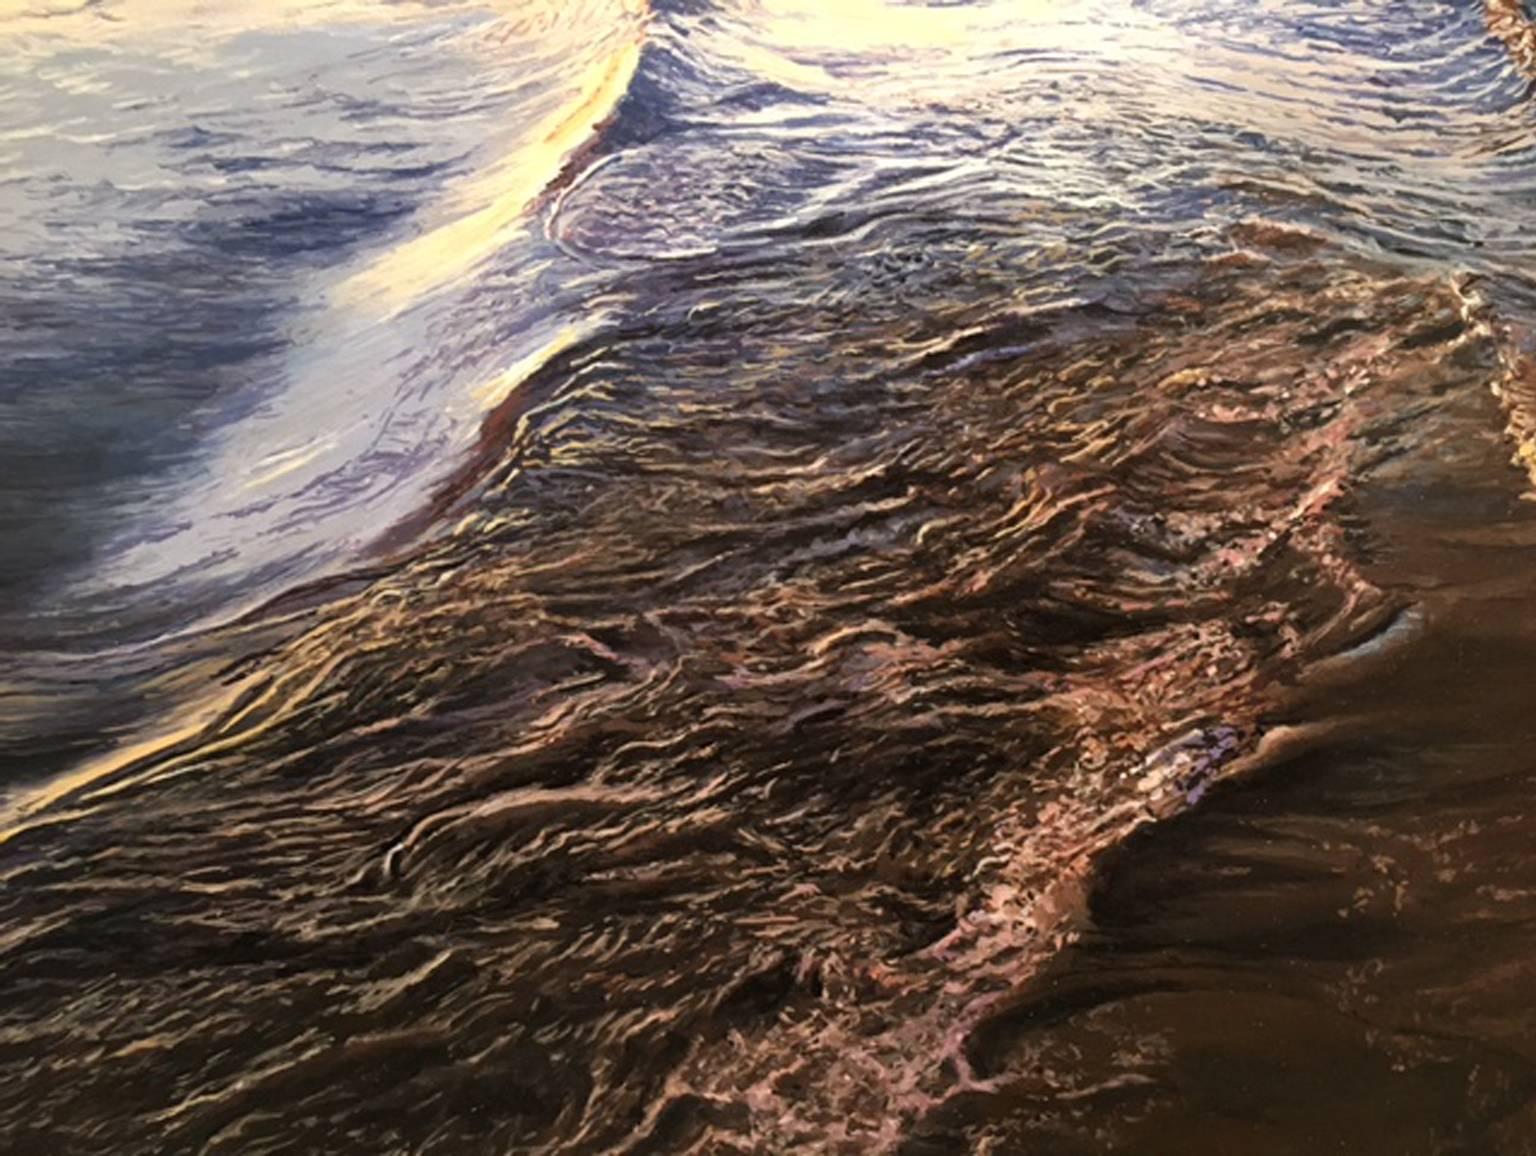 Hartley often paints images from travels around the world. His painting On the Ayeyarwady at Sunrise is from his travels to Myanmar (Burma). In the way Hartley does best the waves flow effortlessly glowing with the soft yet beautiful reflection of